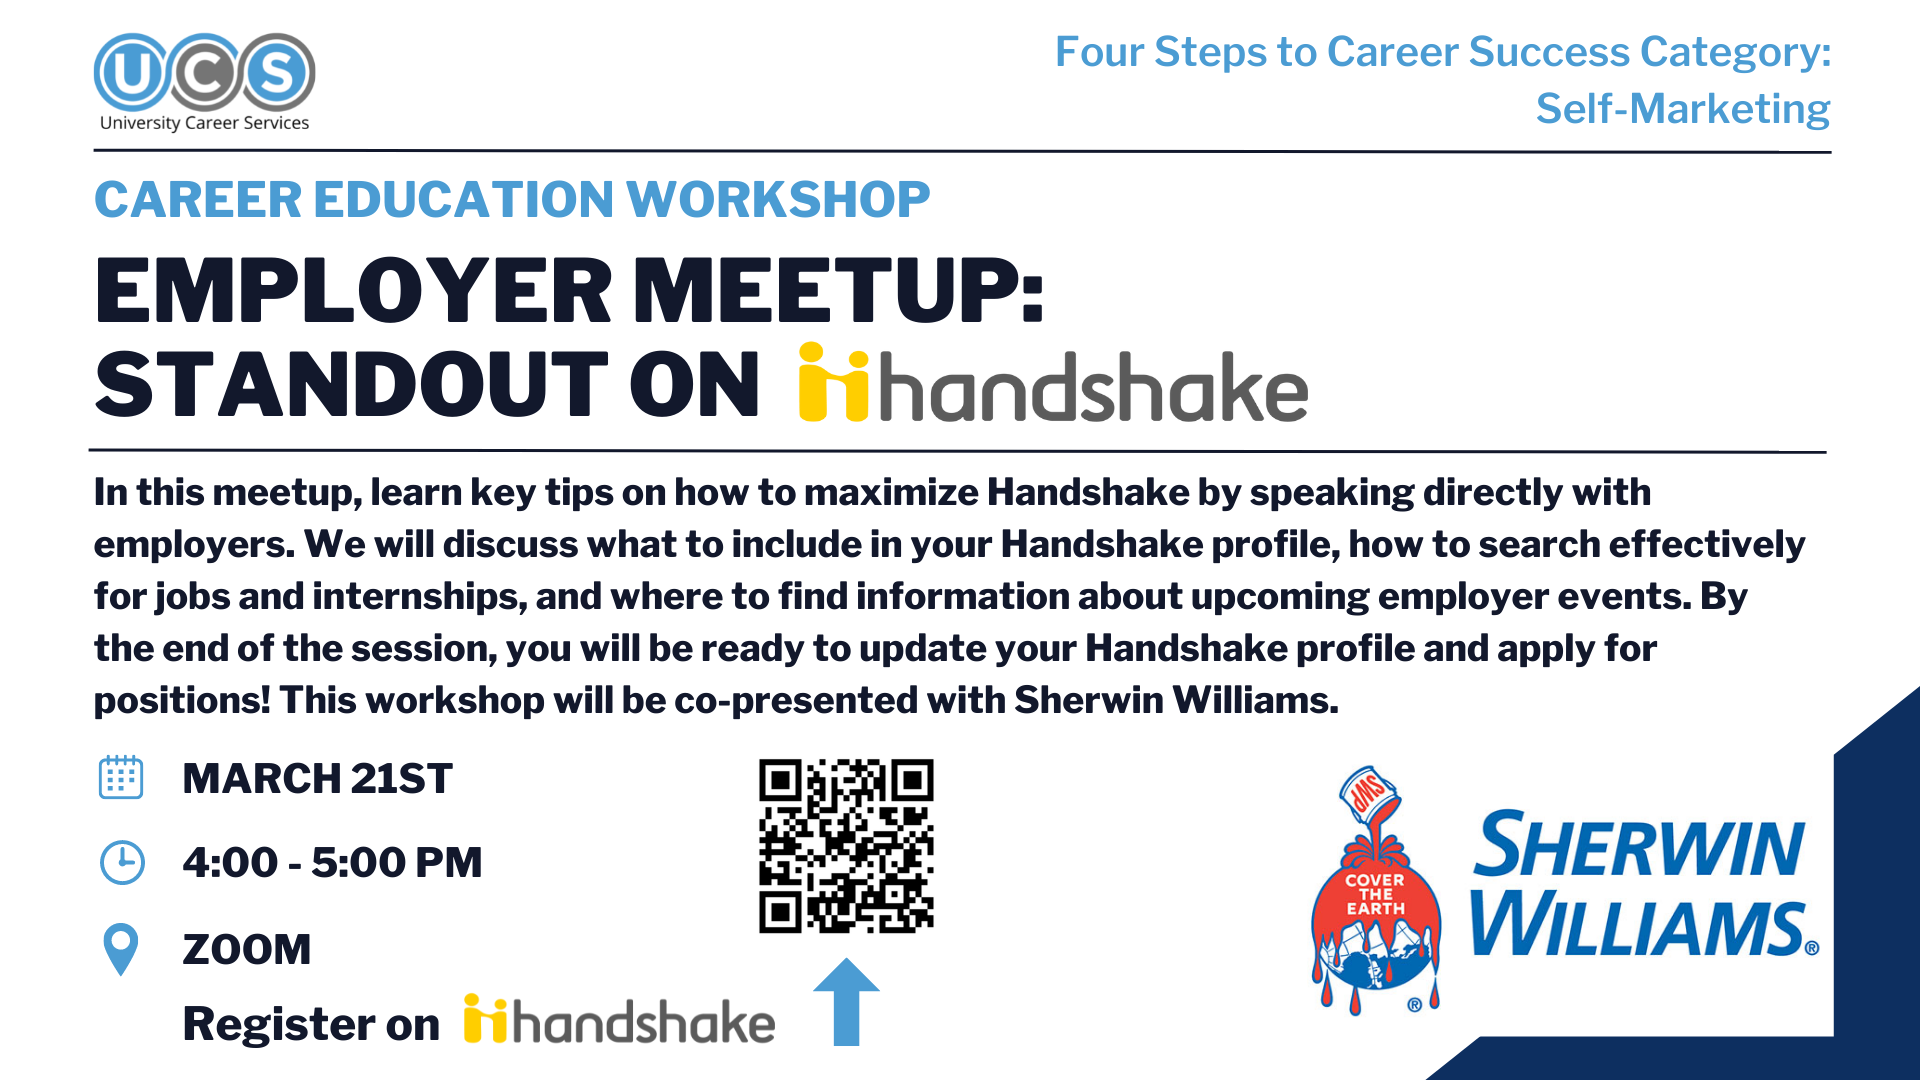 In this meetup, learn key tips on how to maximize Handshake by speaking directly with employers. We will discuss what to include in your Handshake profile, how to search effectively for jobs and internships, and where to find information about upcoming em